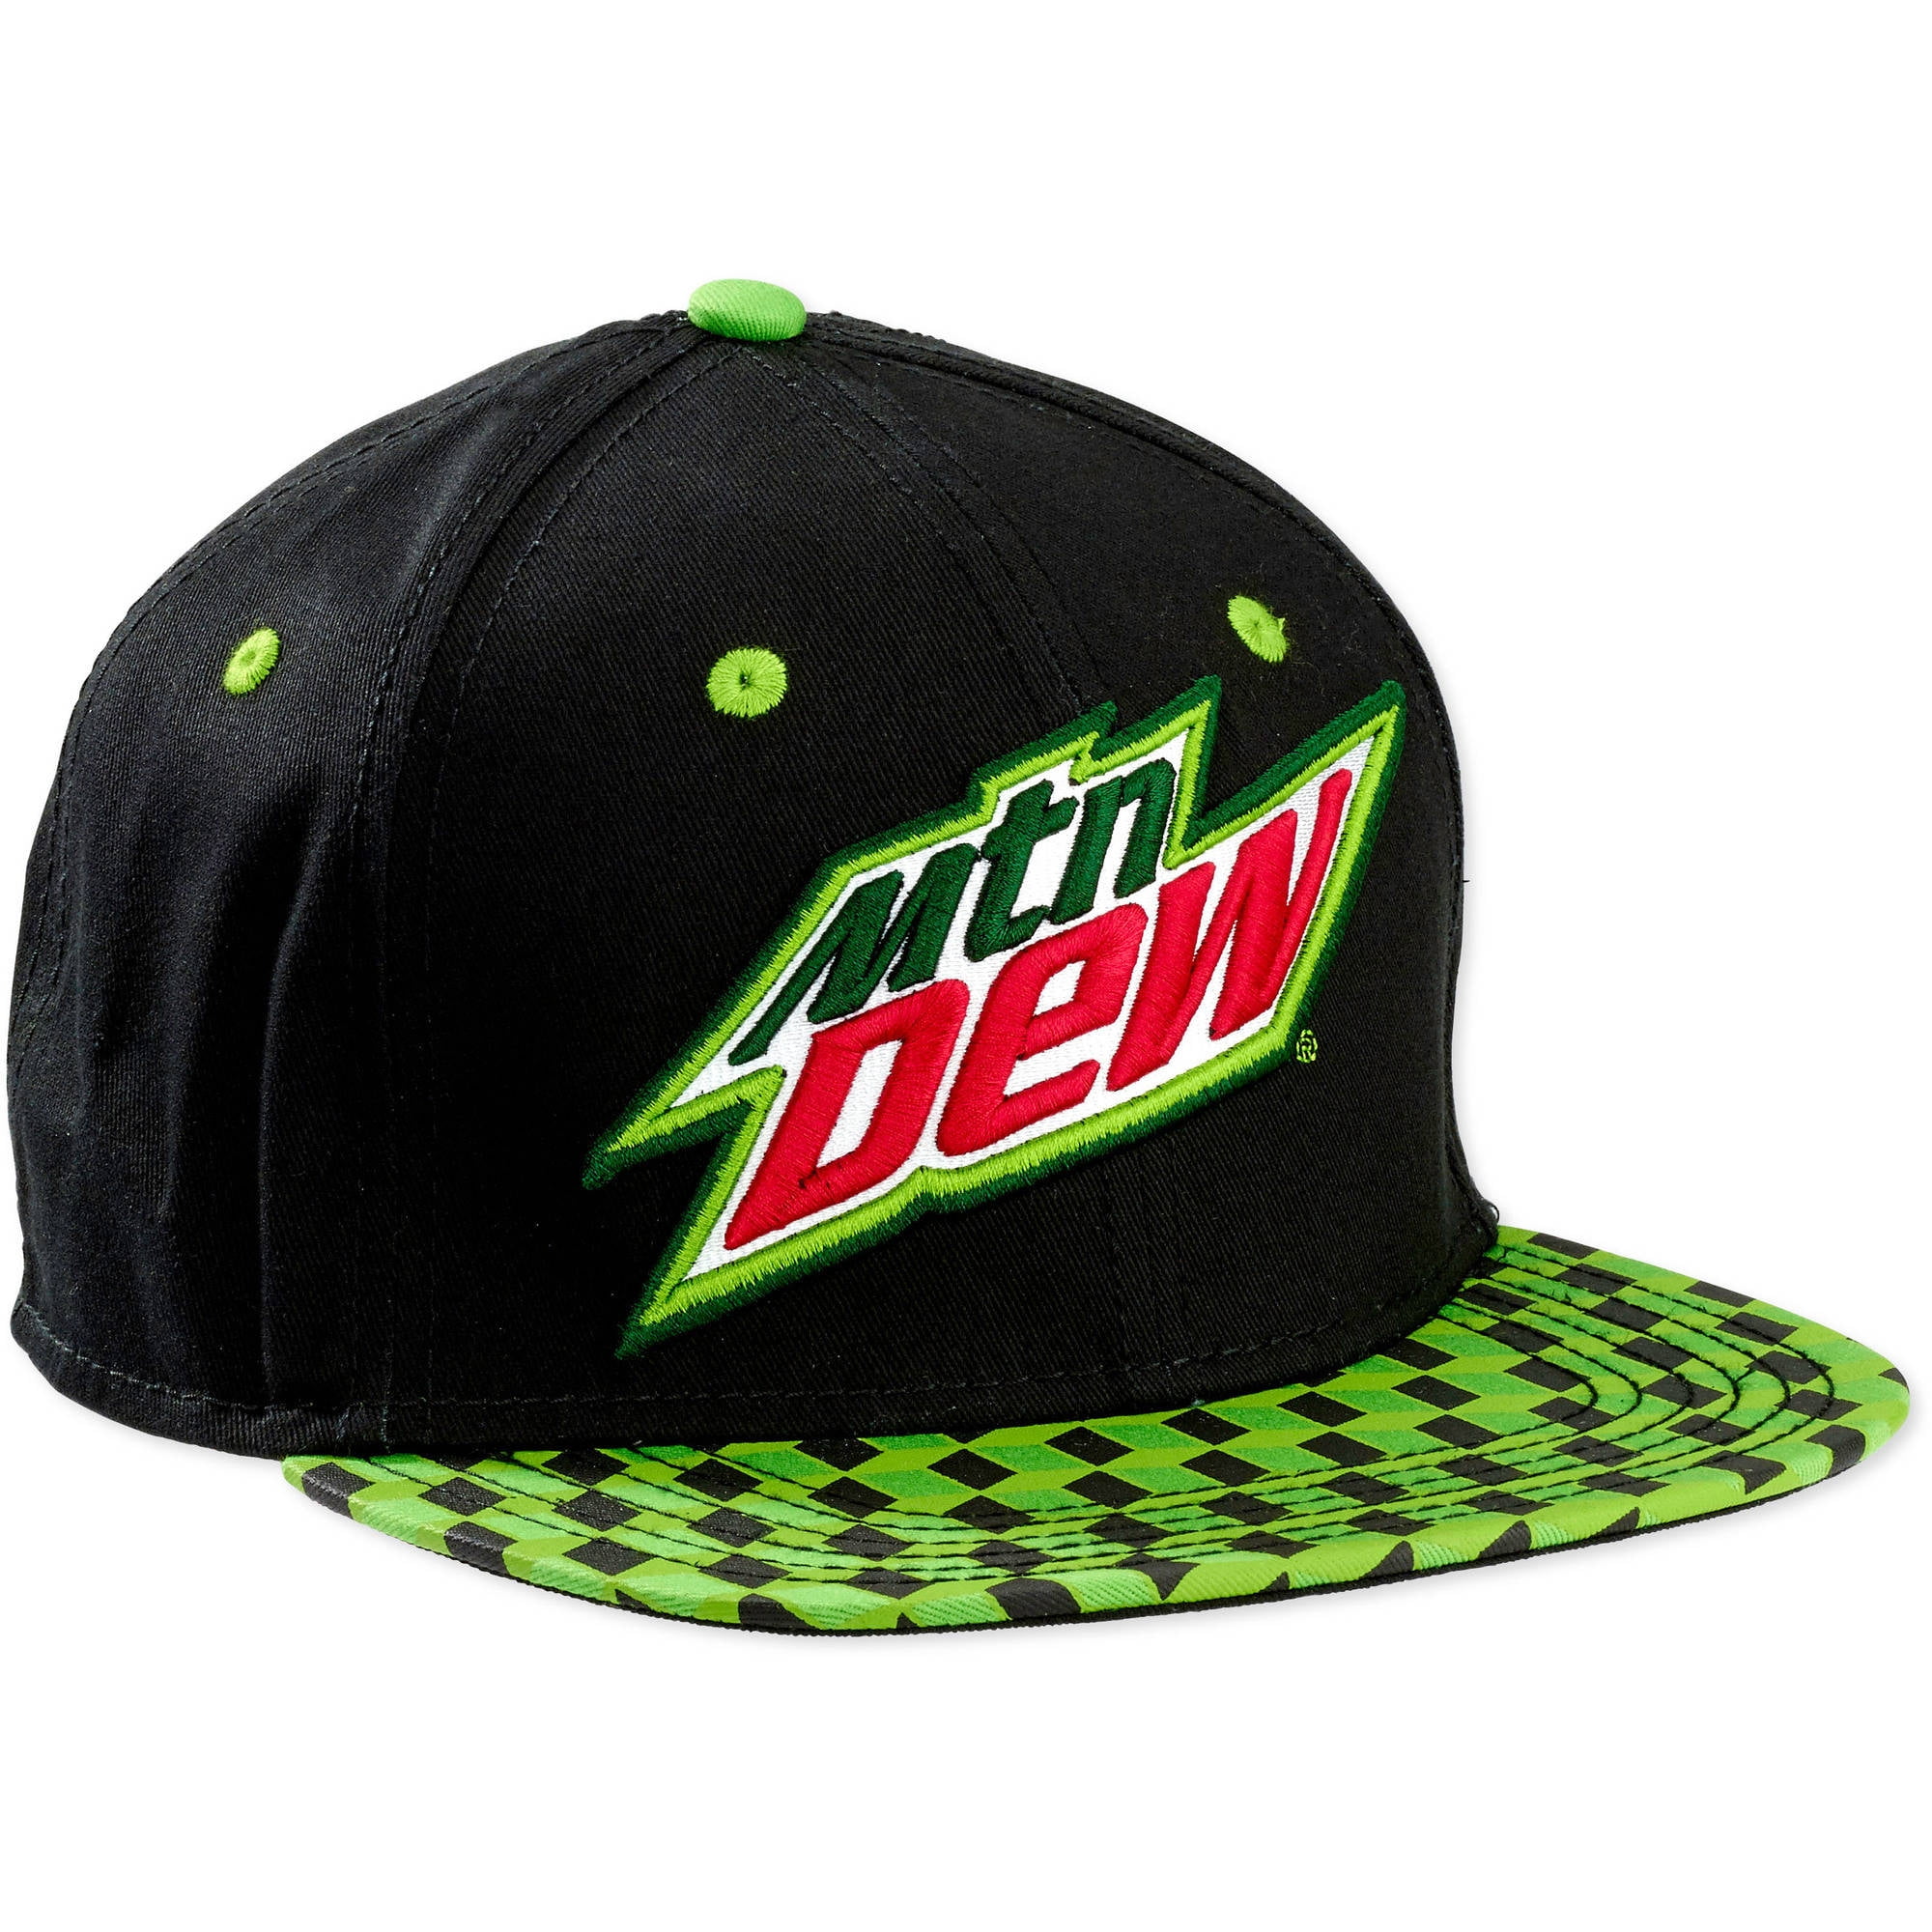 Daily Solid Color Mountain-MTN-Dew-Logo-Knit Beanies Cap Headwear for Adult Mens Womens